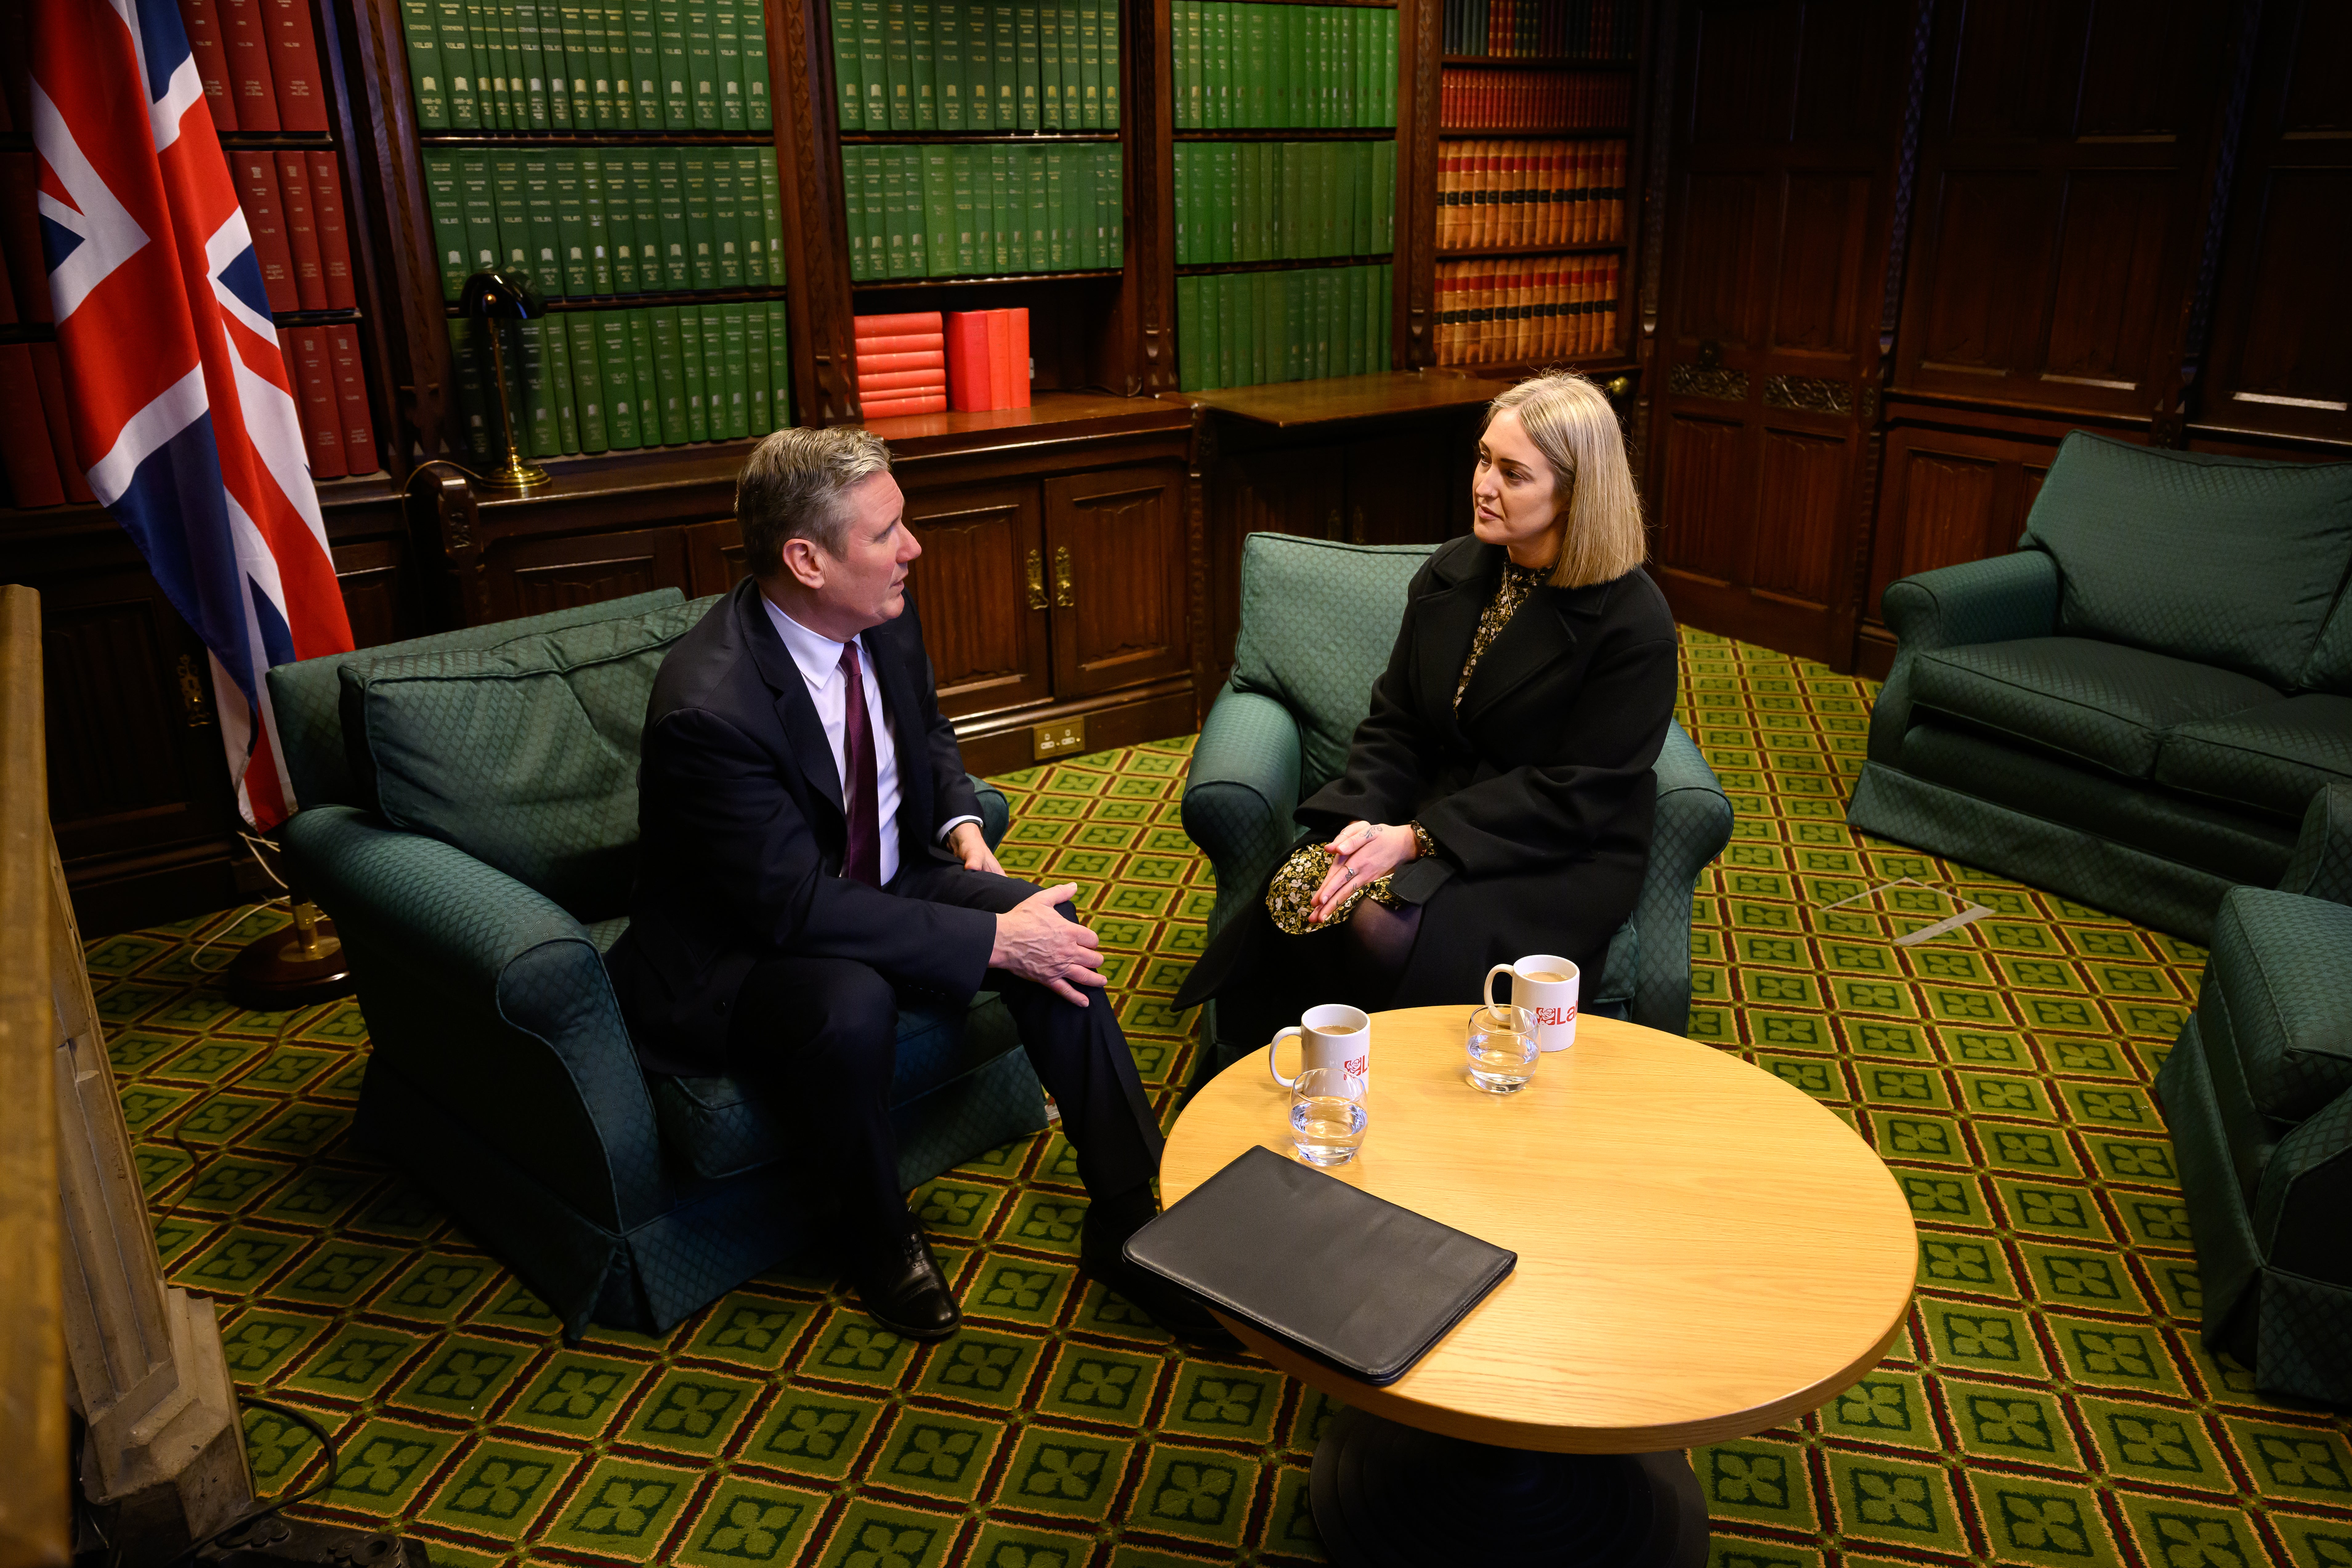 Ms Ghey recently discussed her campaign to get mindfulness taught in schools with Labour leader Sir Keir Starmer